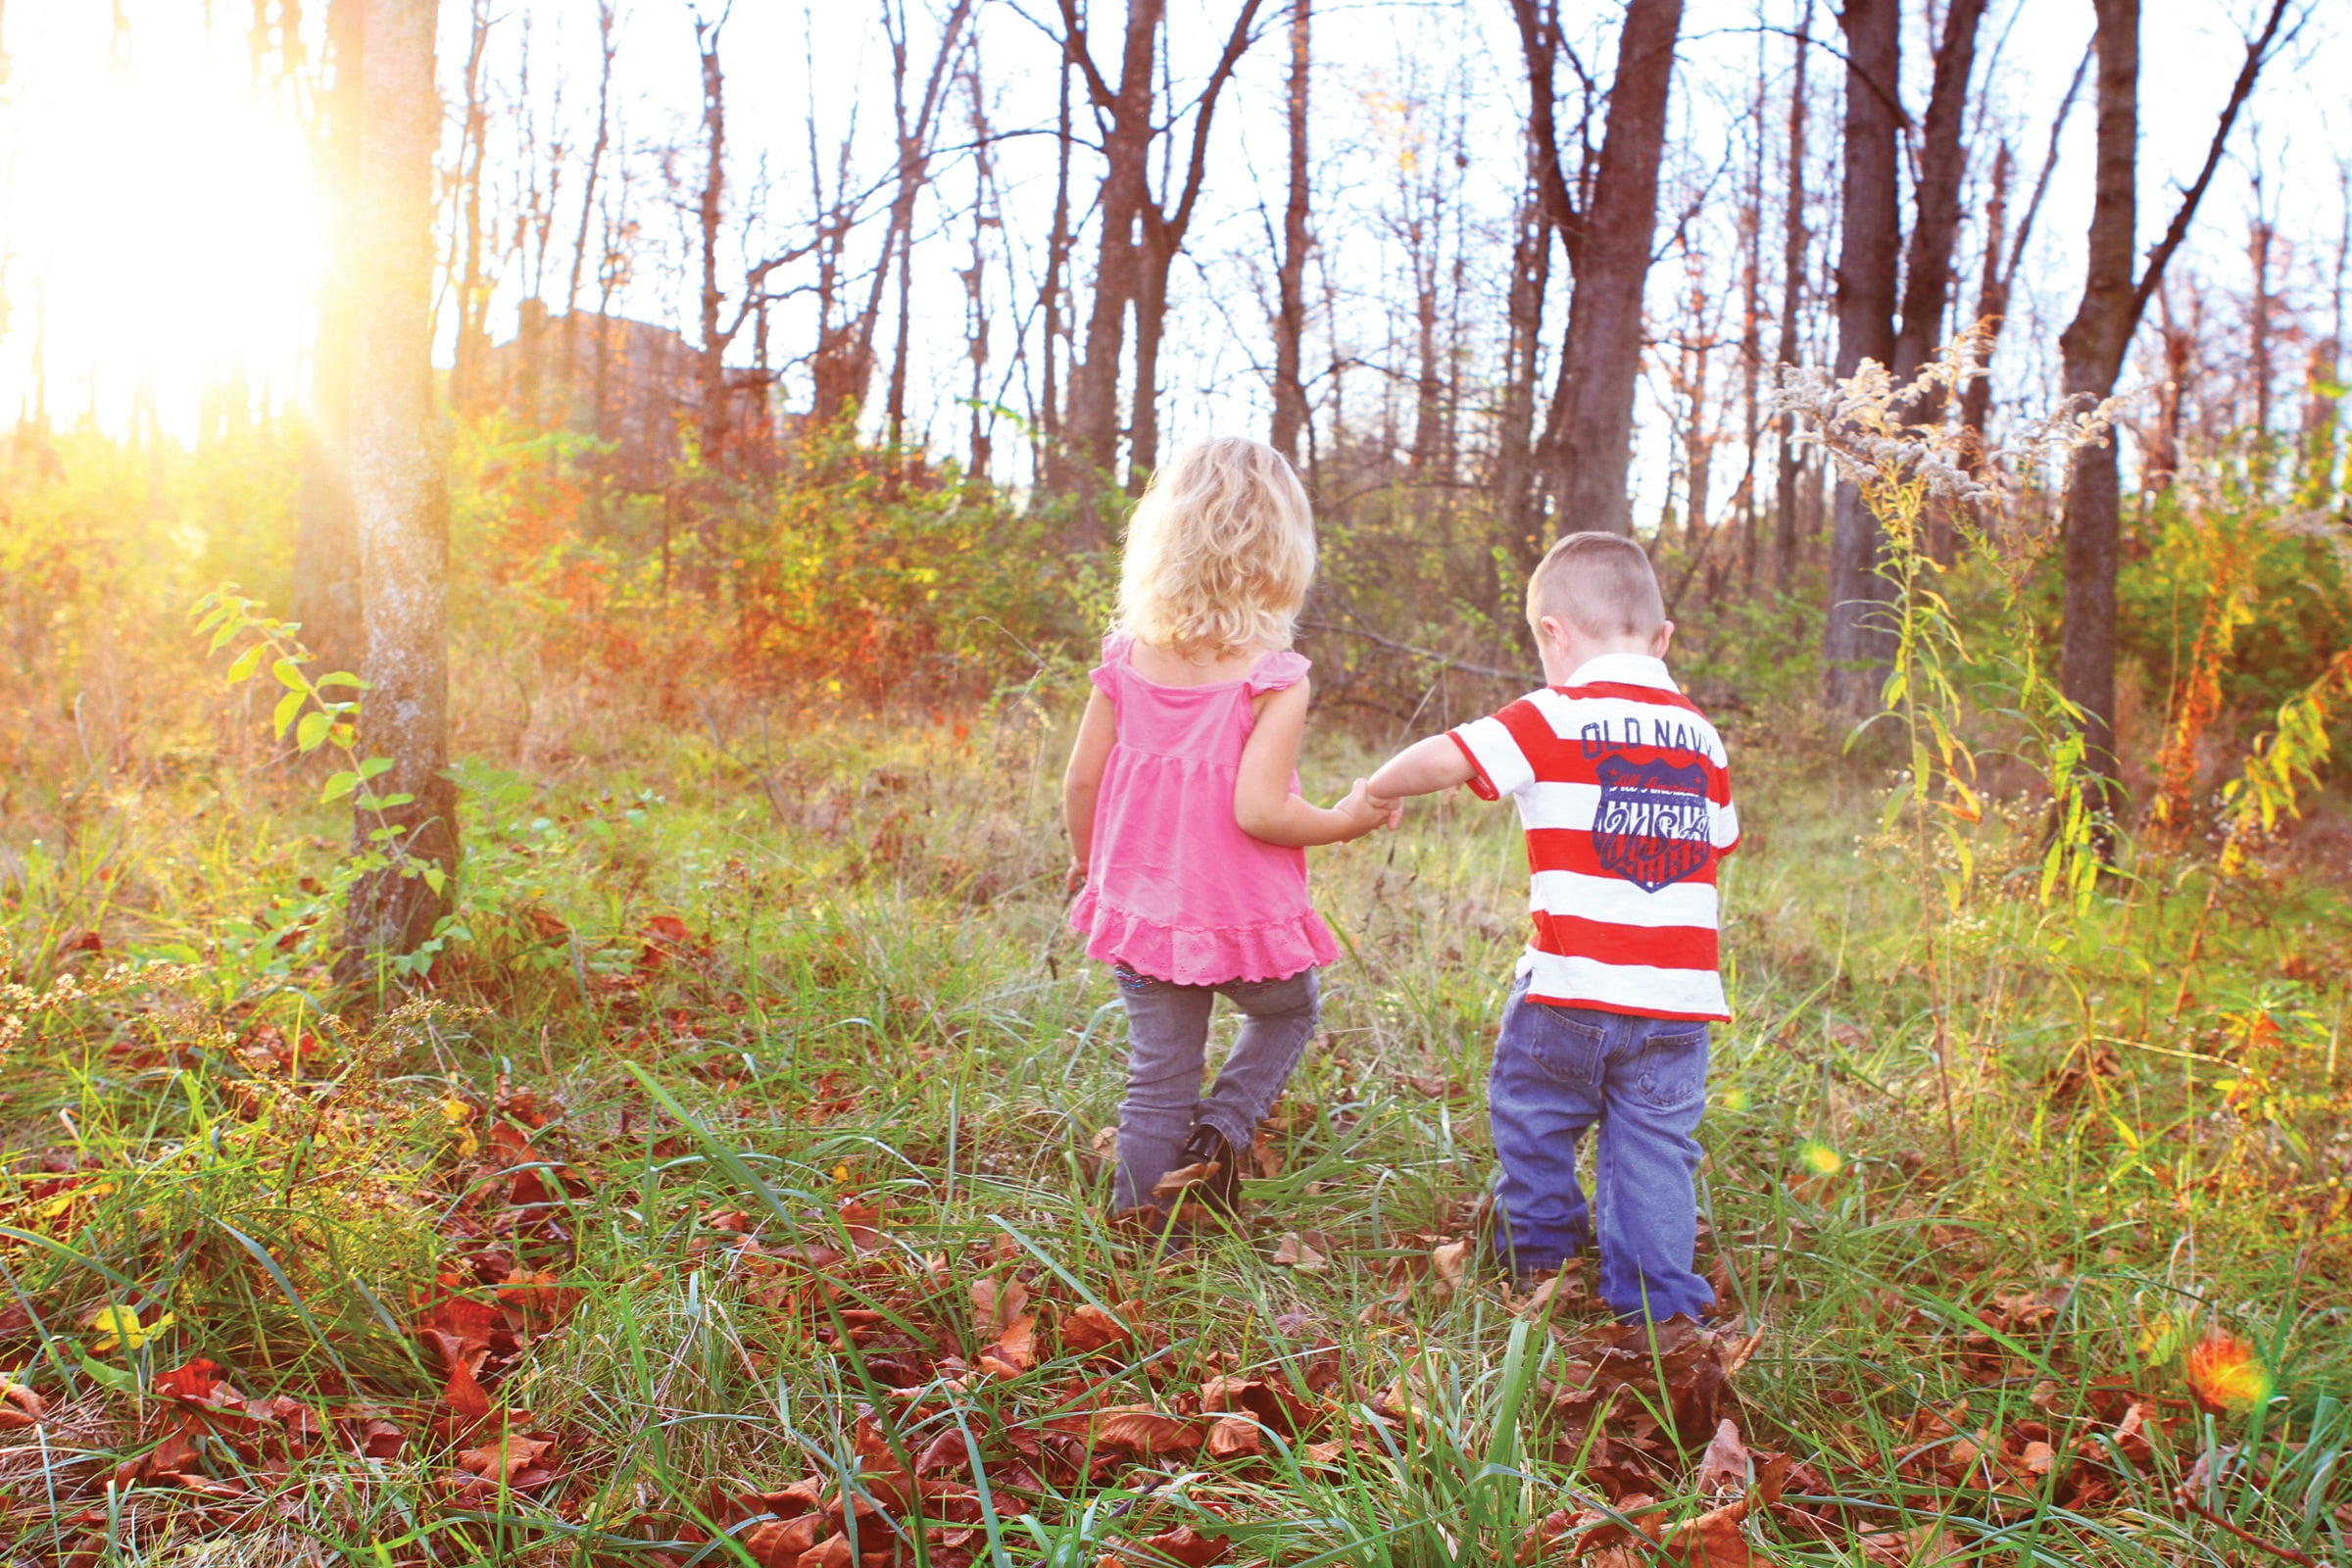 Boy And Girl Holding Hands Walking In Forest During Daytime Hd Wallpaper Wallpaper Flare